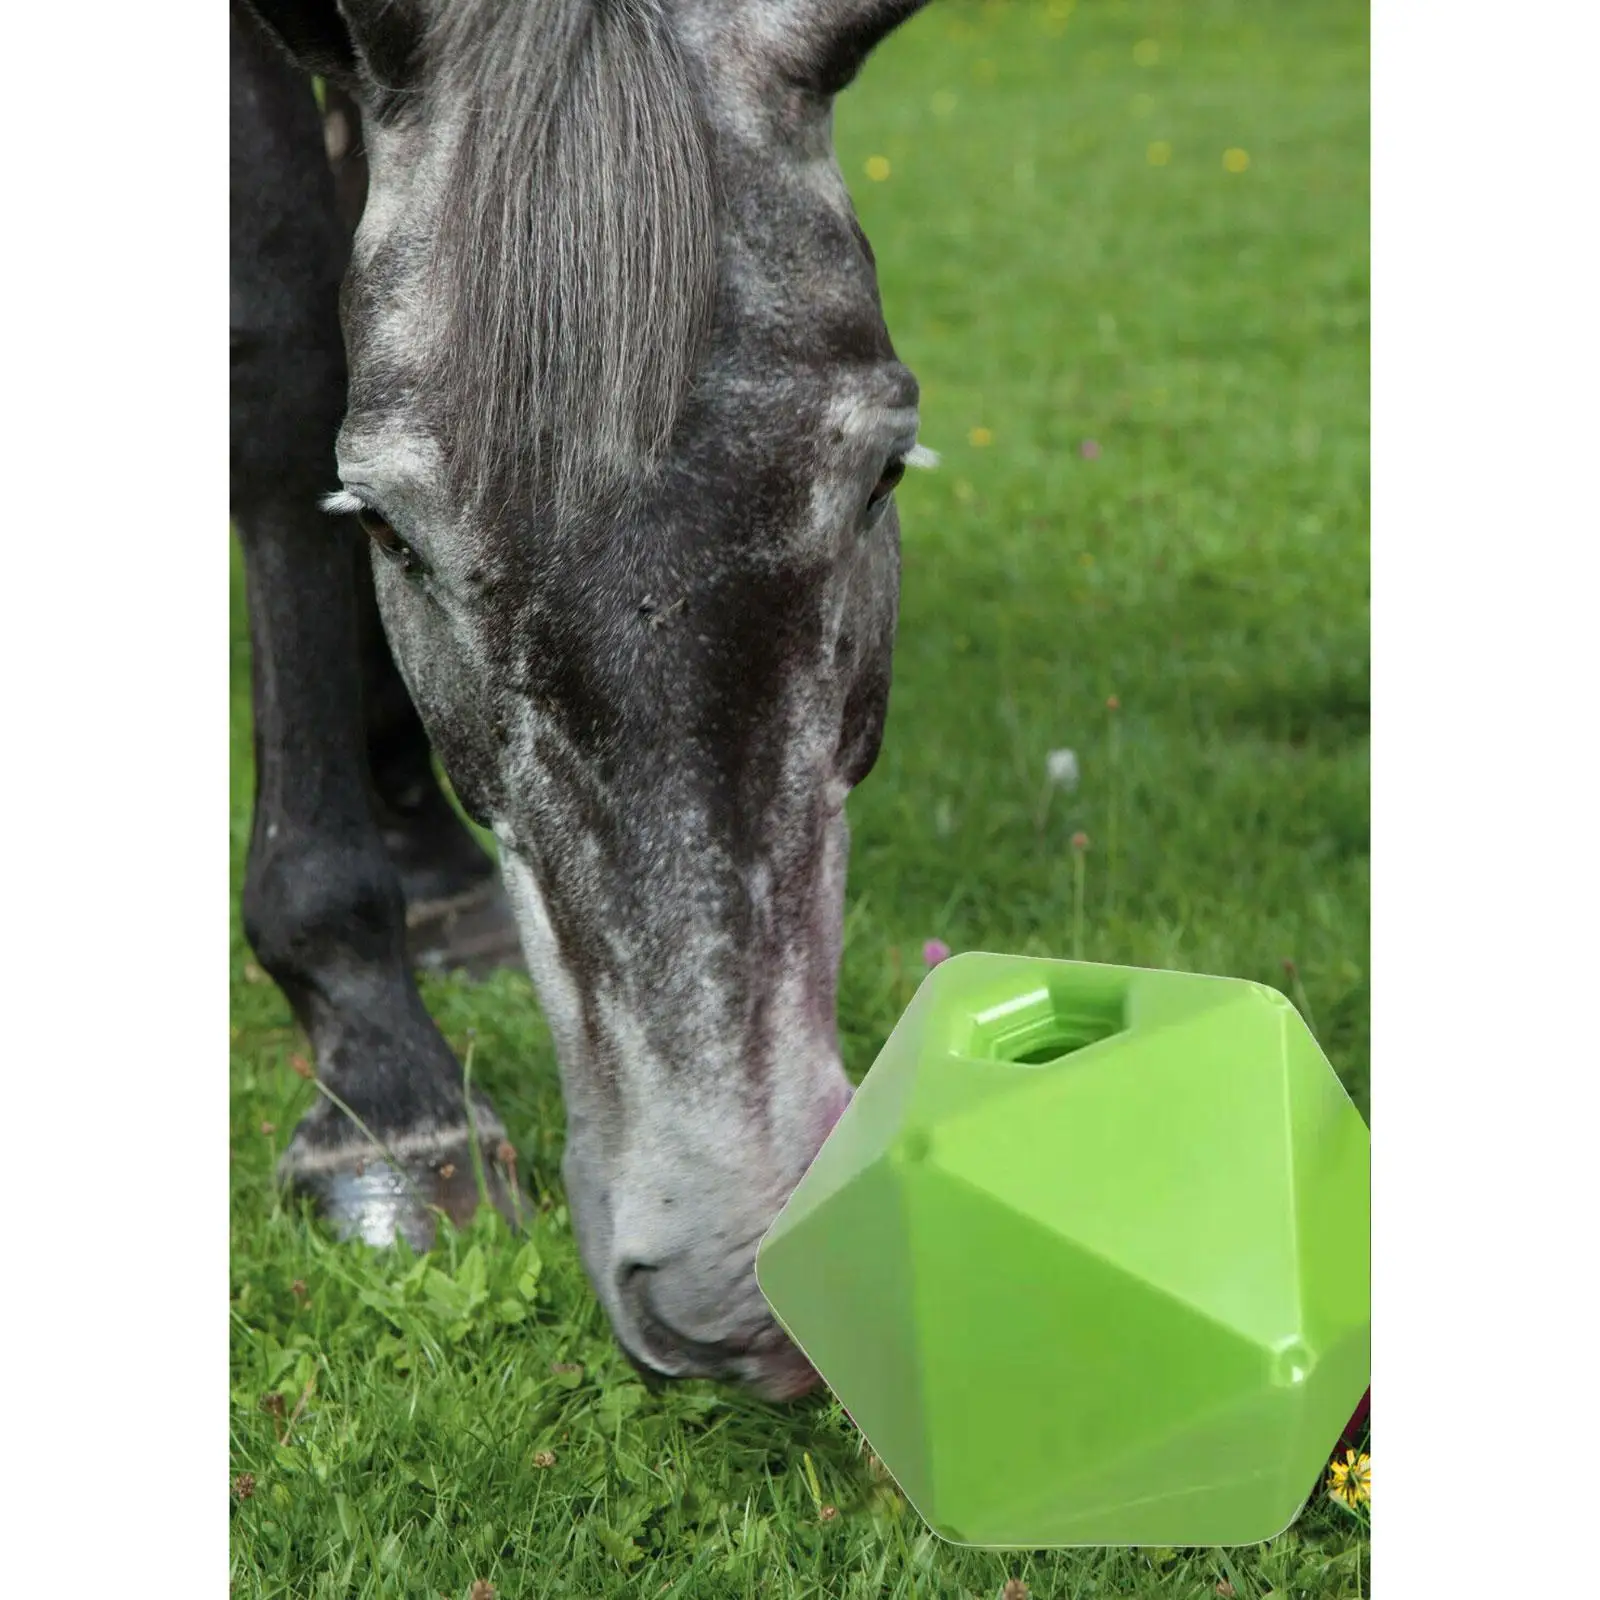 Funny Horse Treat Ball Feeding Toys Accessories Relieve Boredom Stress Play Snack Ball for Equine Sheep Farmhouse Lawn